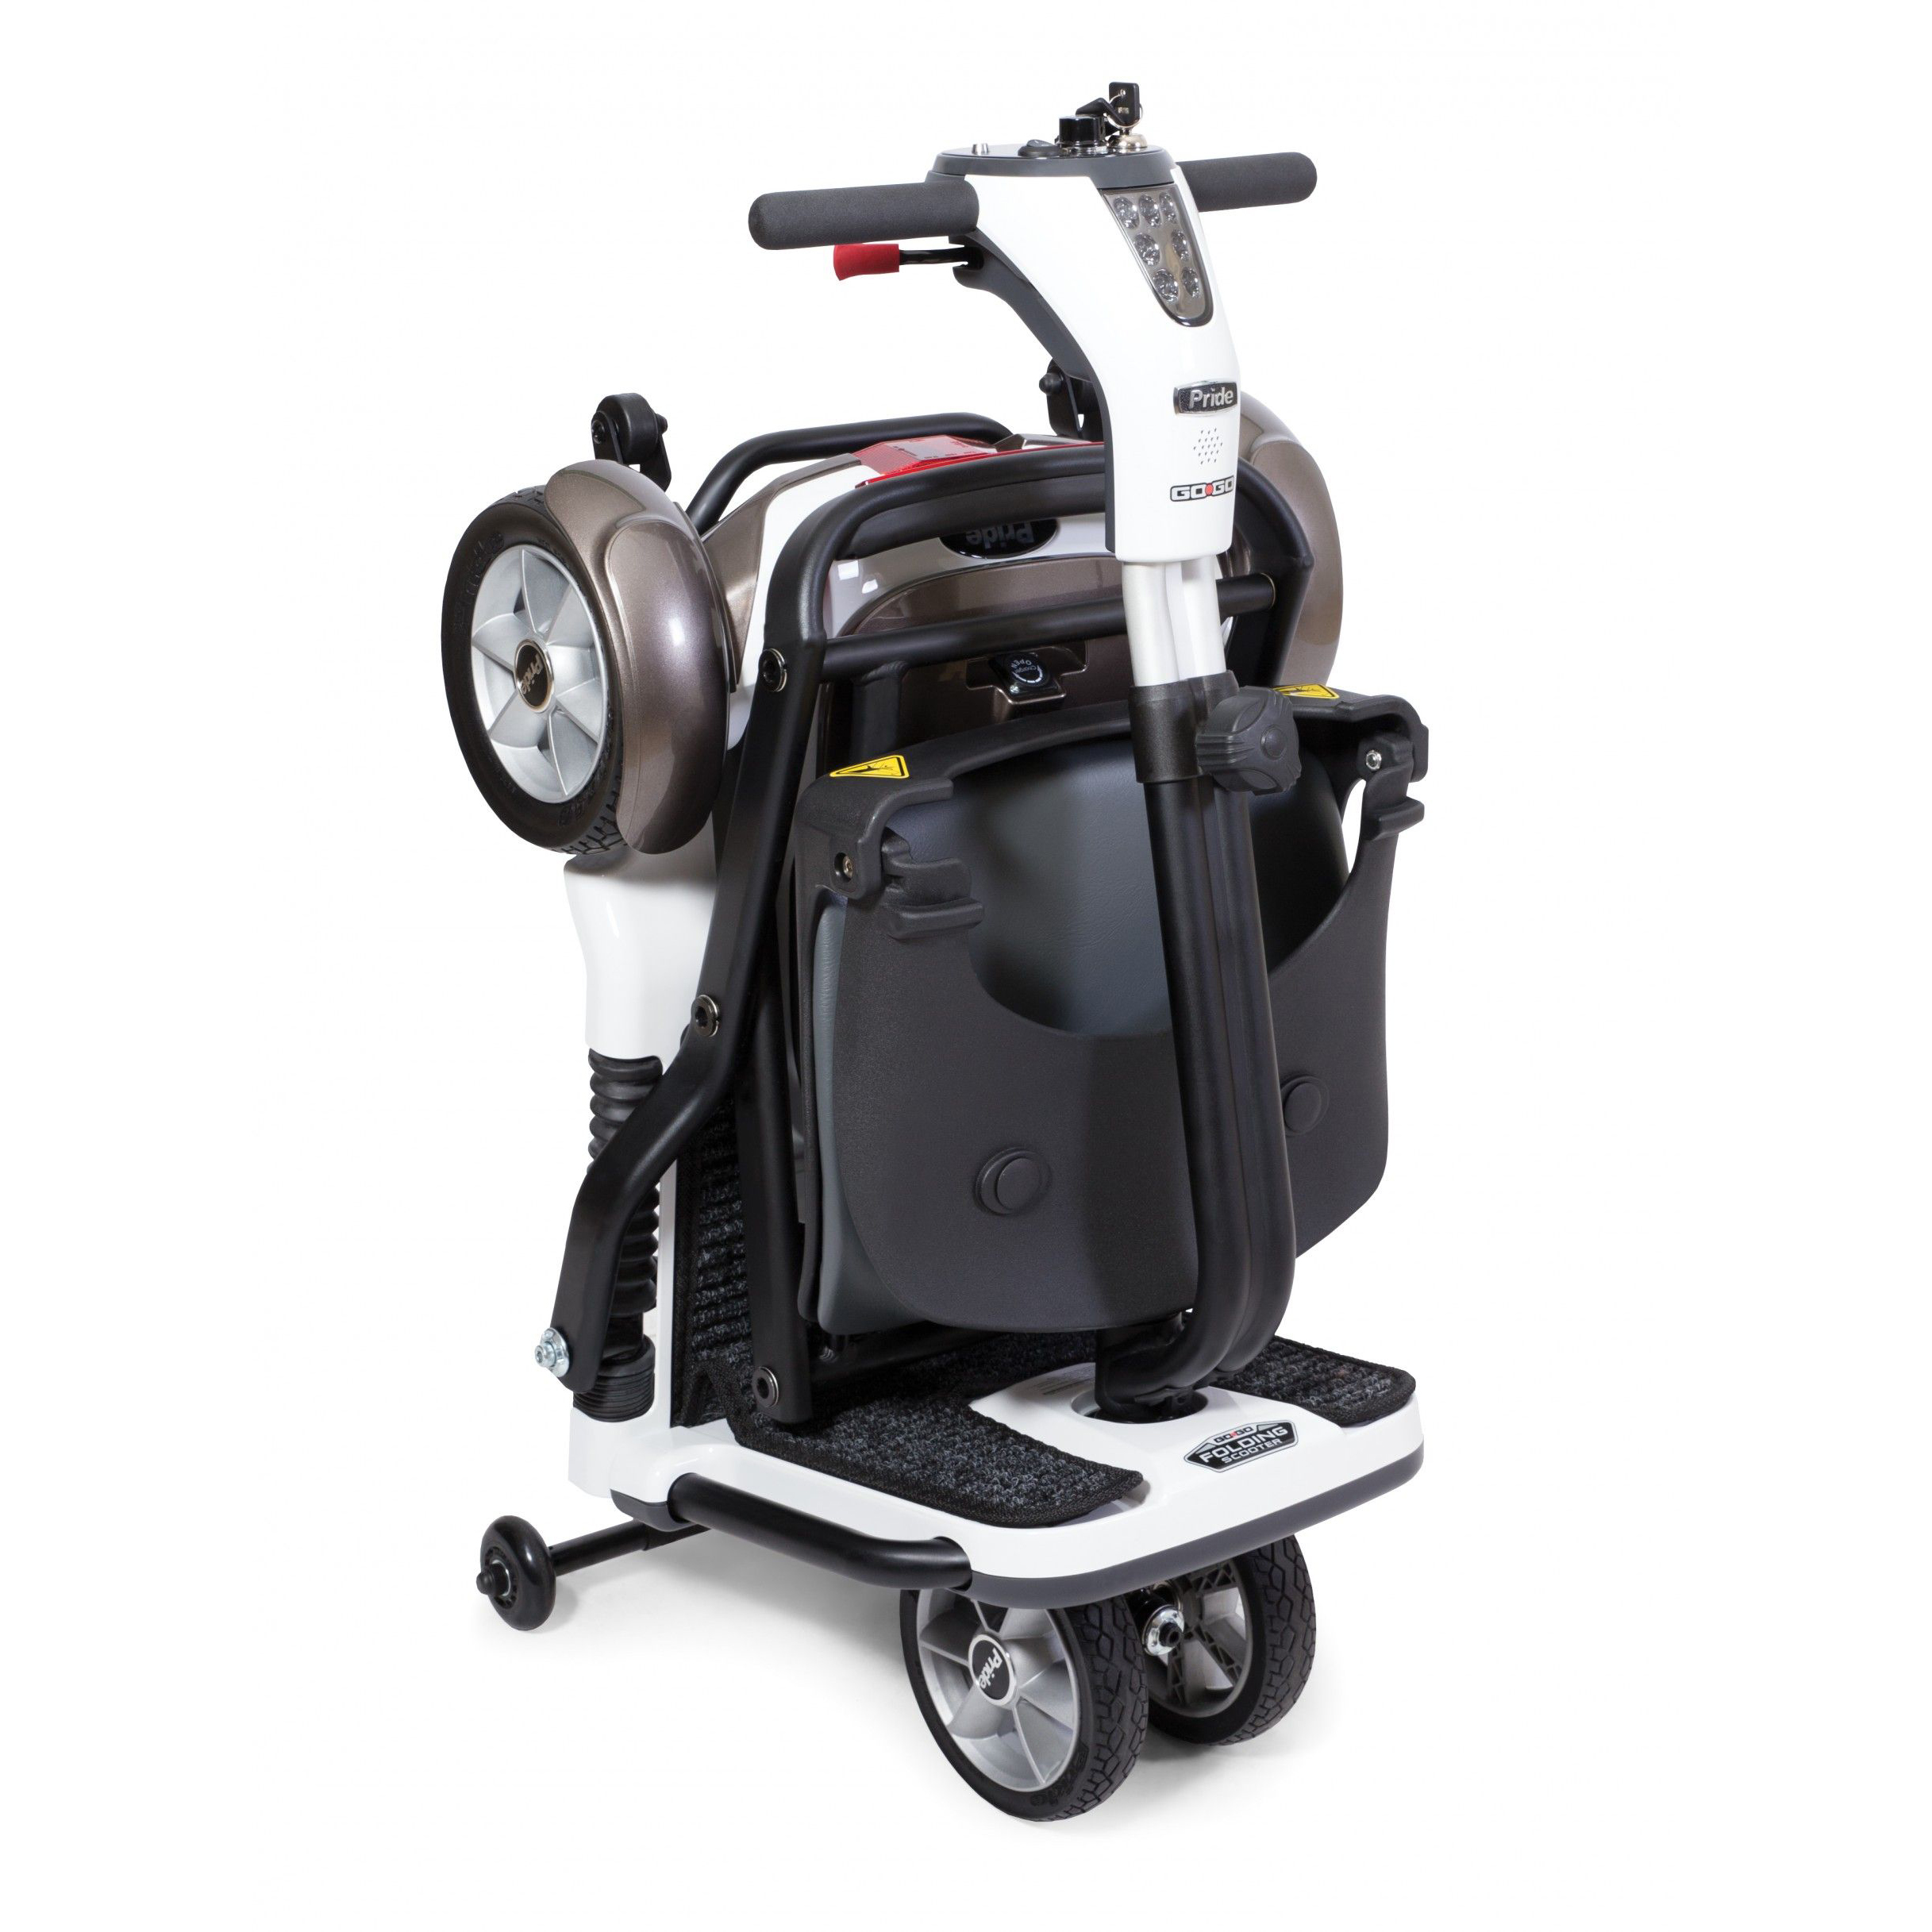 pride mobility scooter